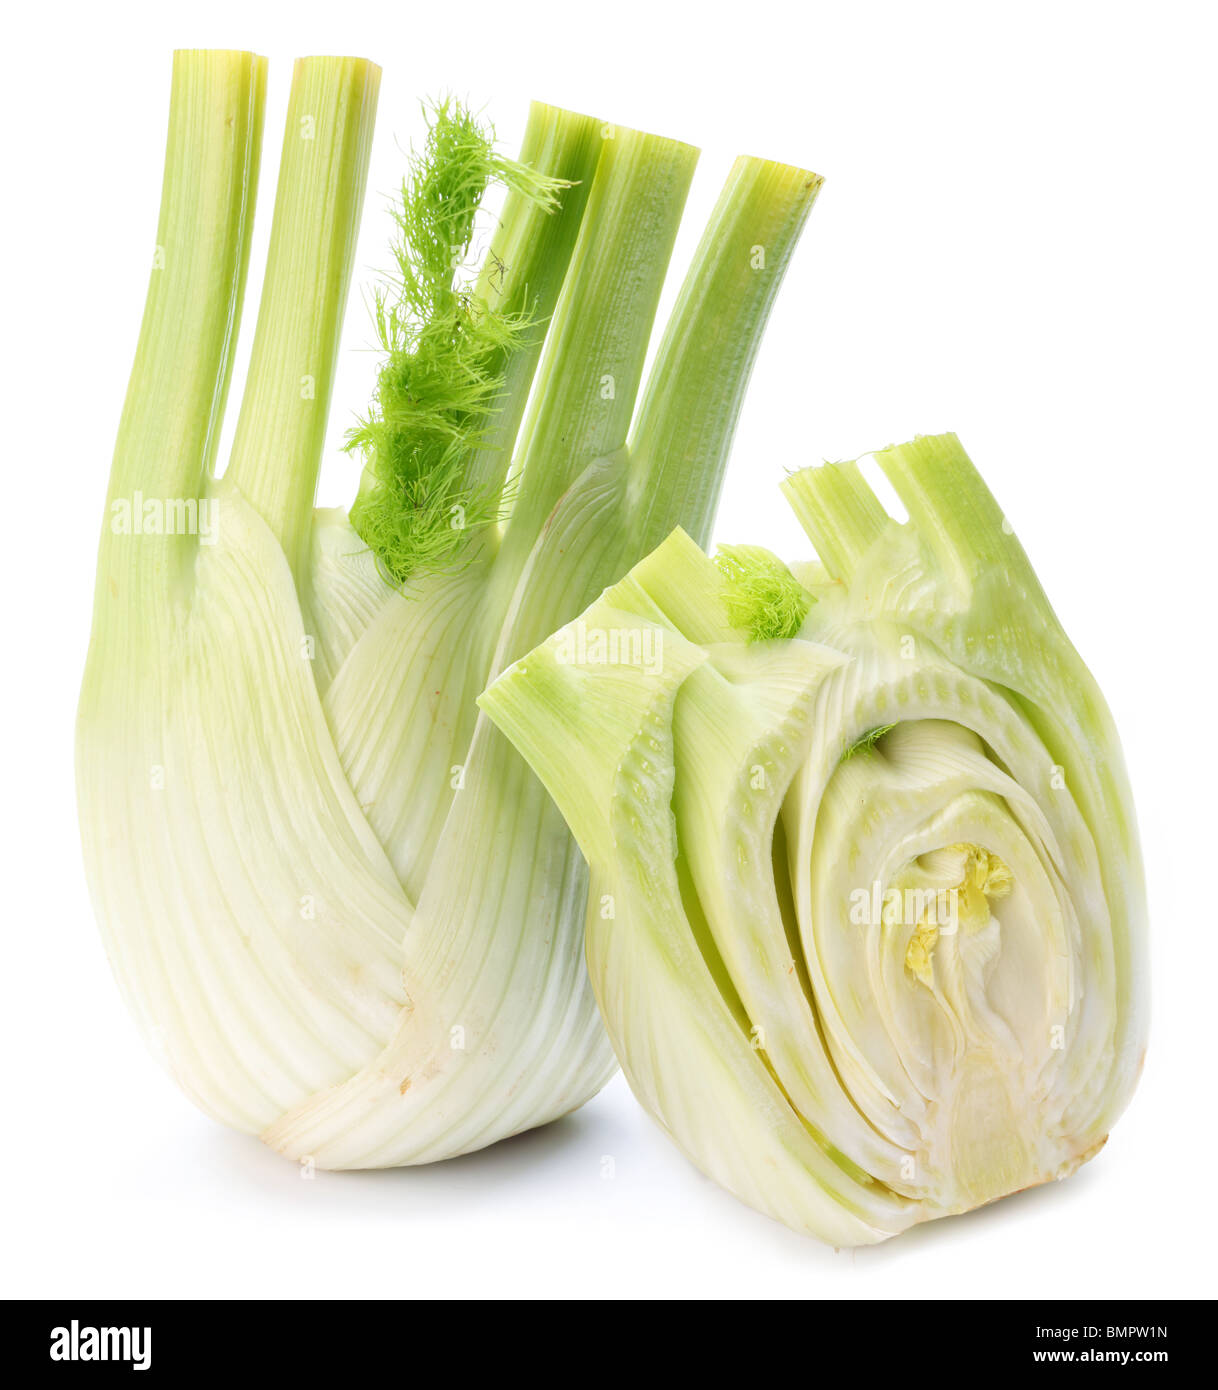 Ripe fennel isolated on a white background. Stock Photo